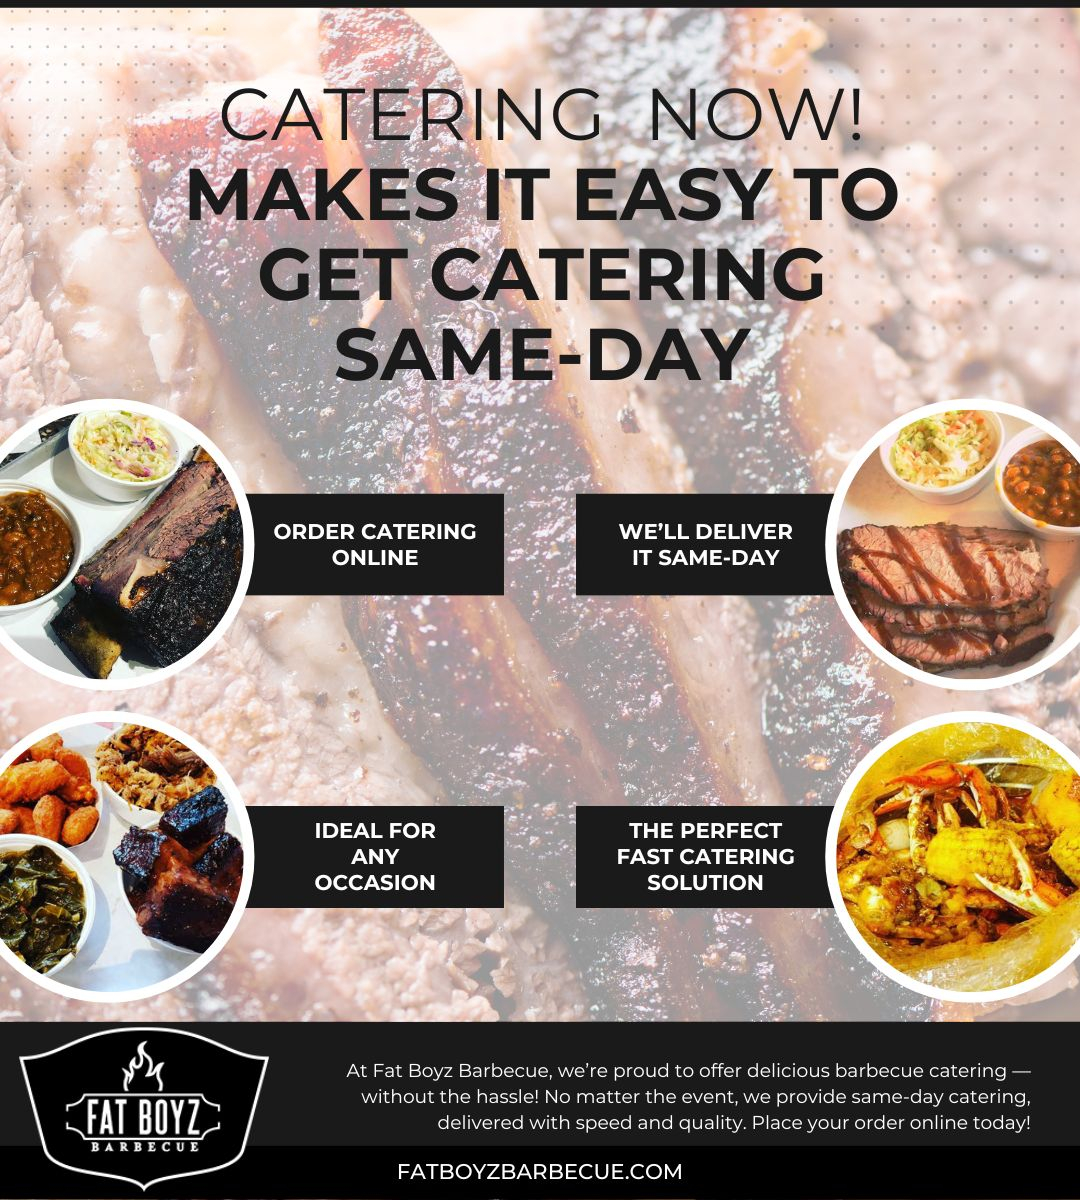 M44253 - Catering Now! Infographic.jpg